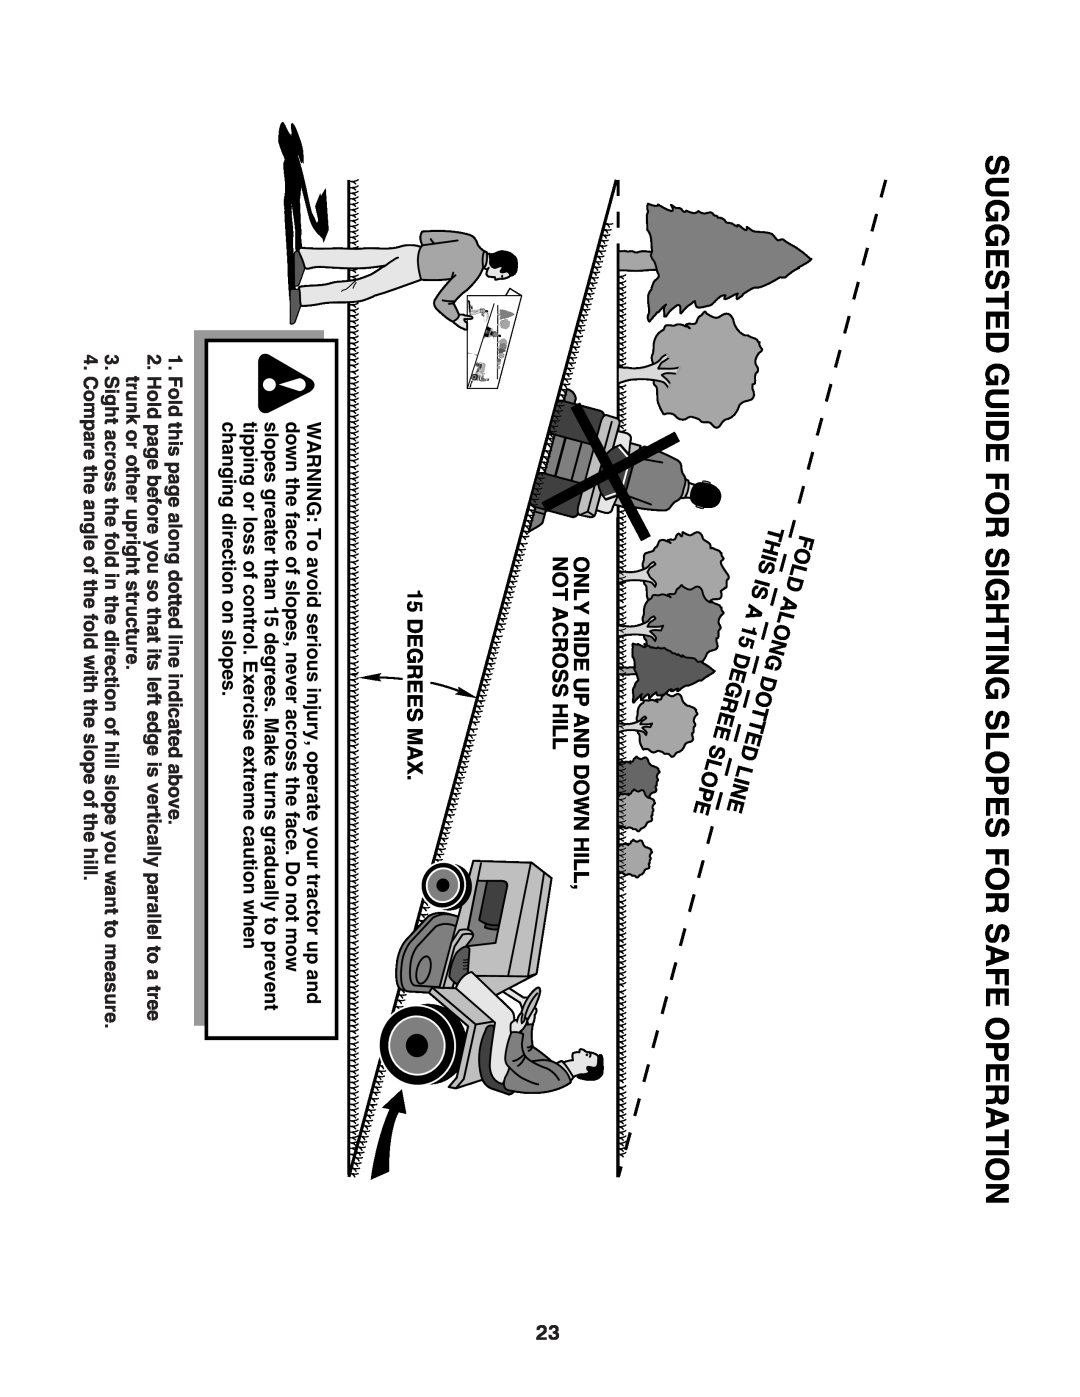 Poulan 424008 manual Suggested Guide For Sighting Slopes For Safe Operation, Fold, Alon, Dotted, Line, Lope 